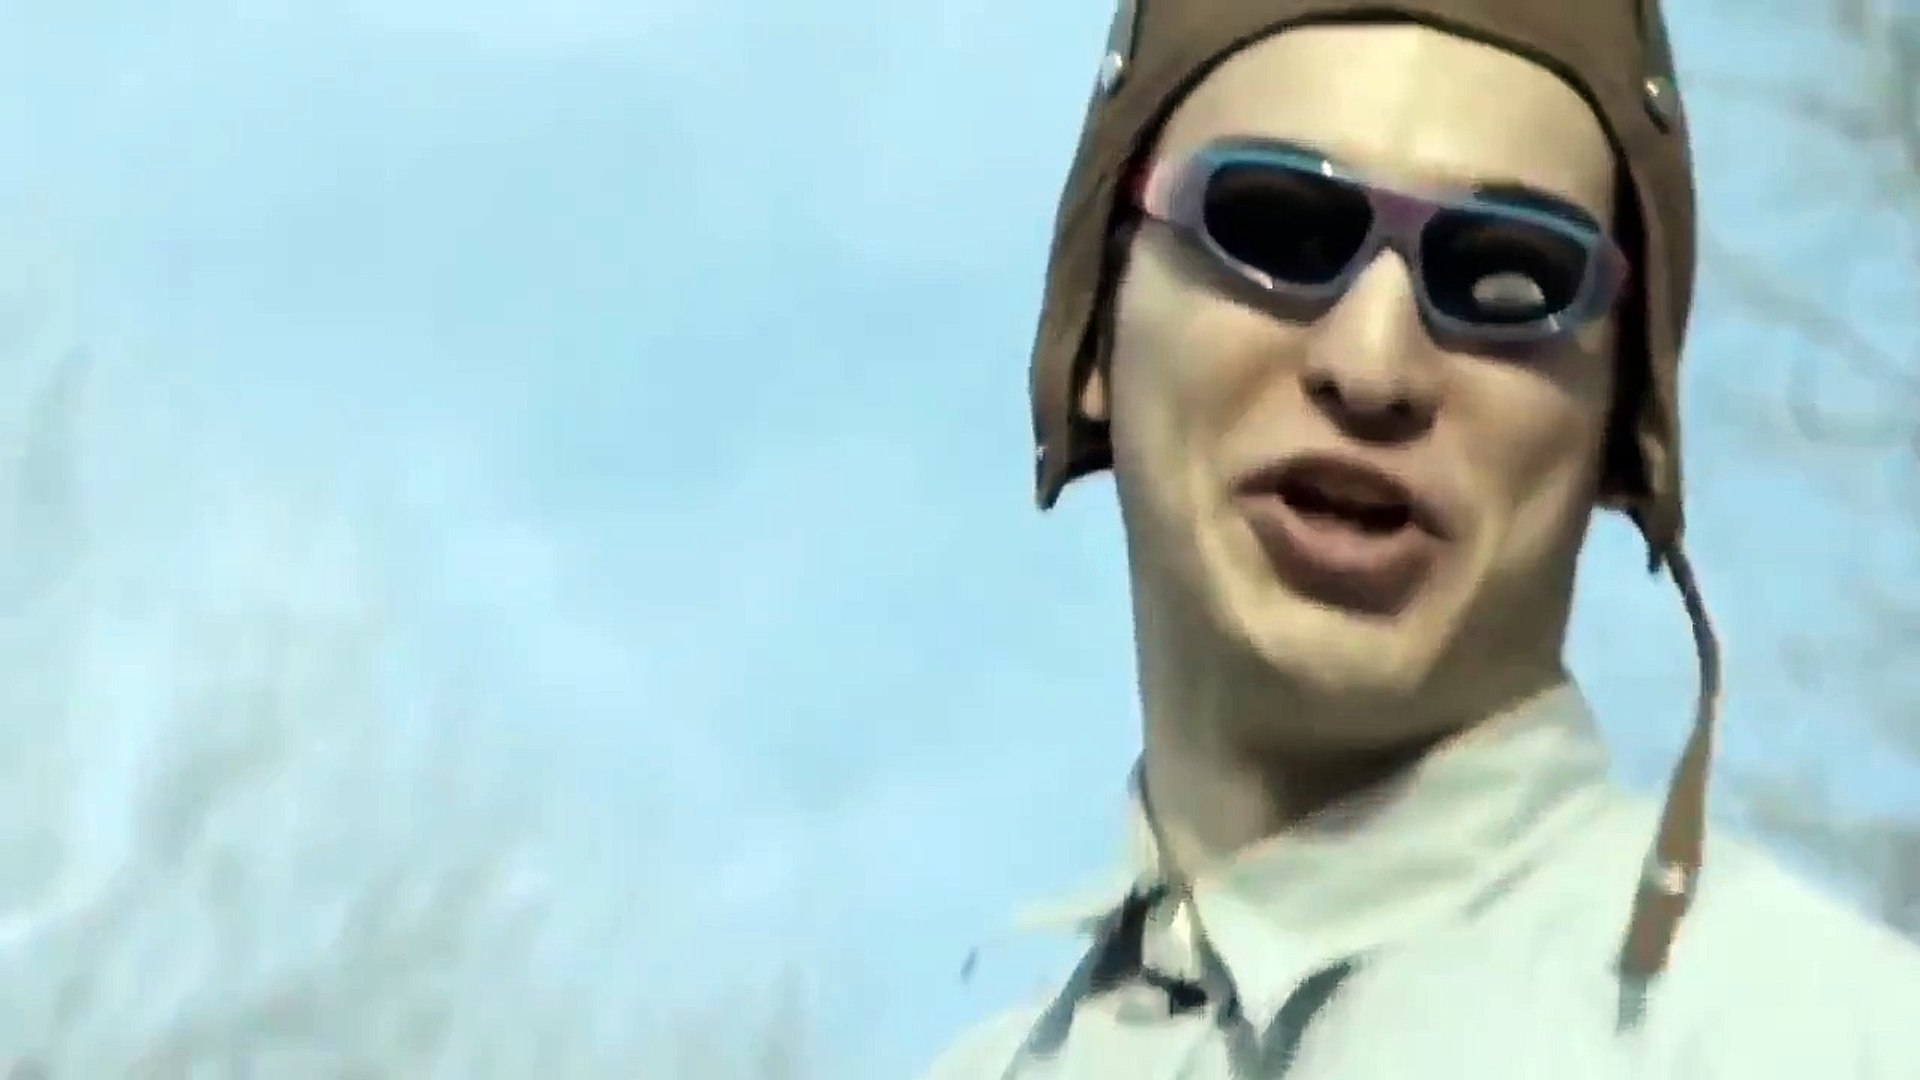 FilthyFrank - Robot Fanfiction video Dailymotion